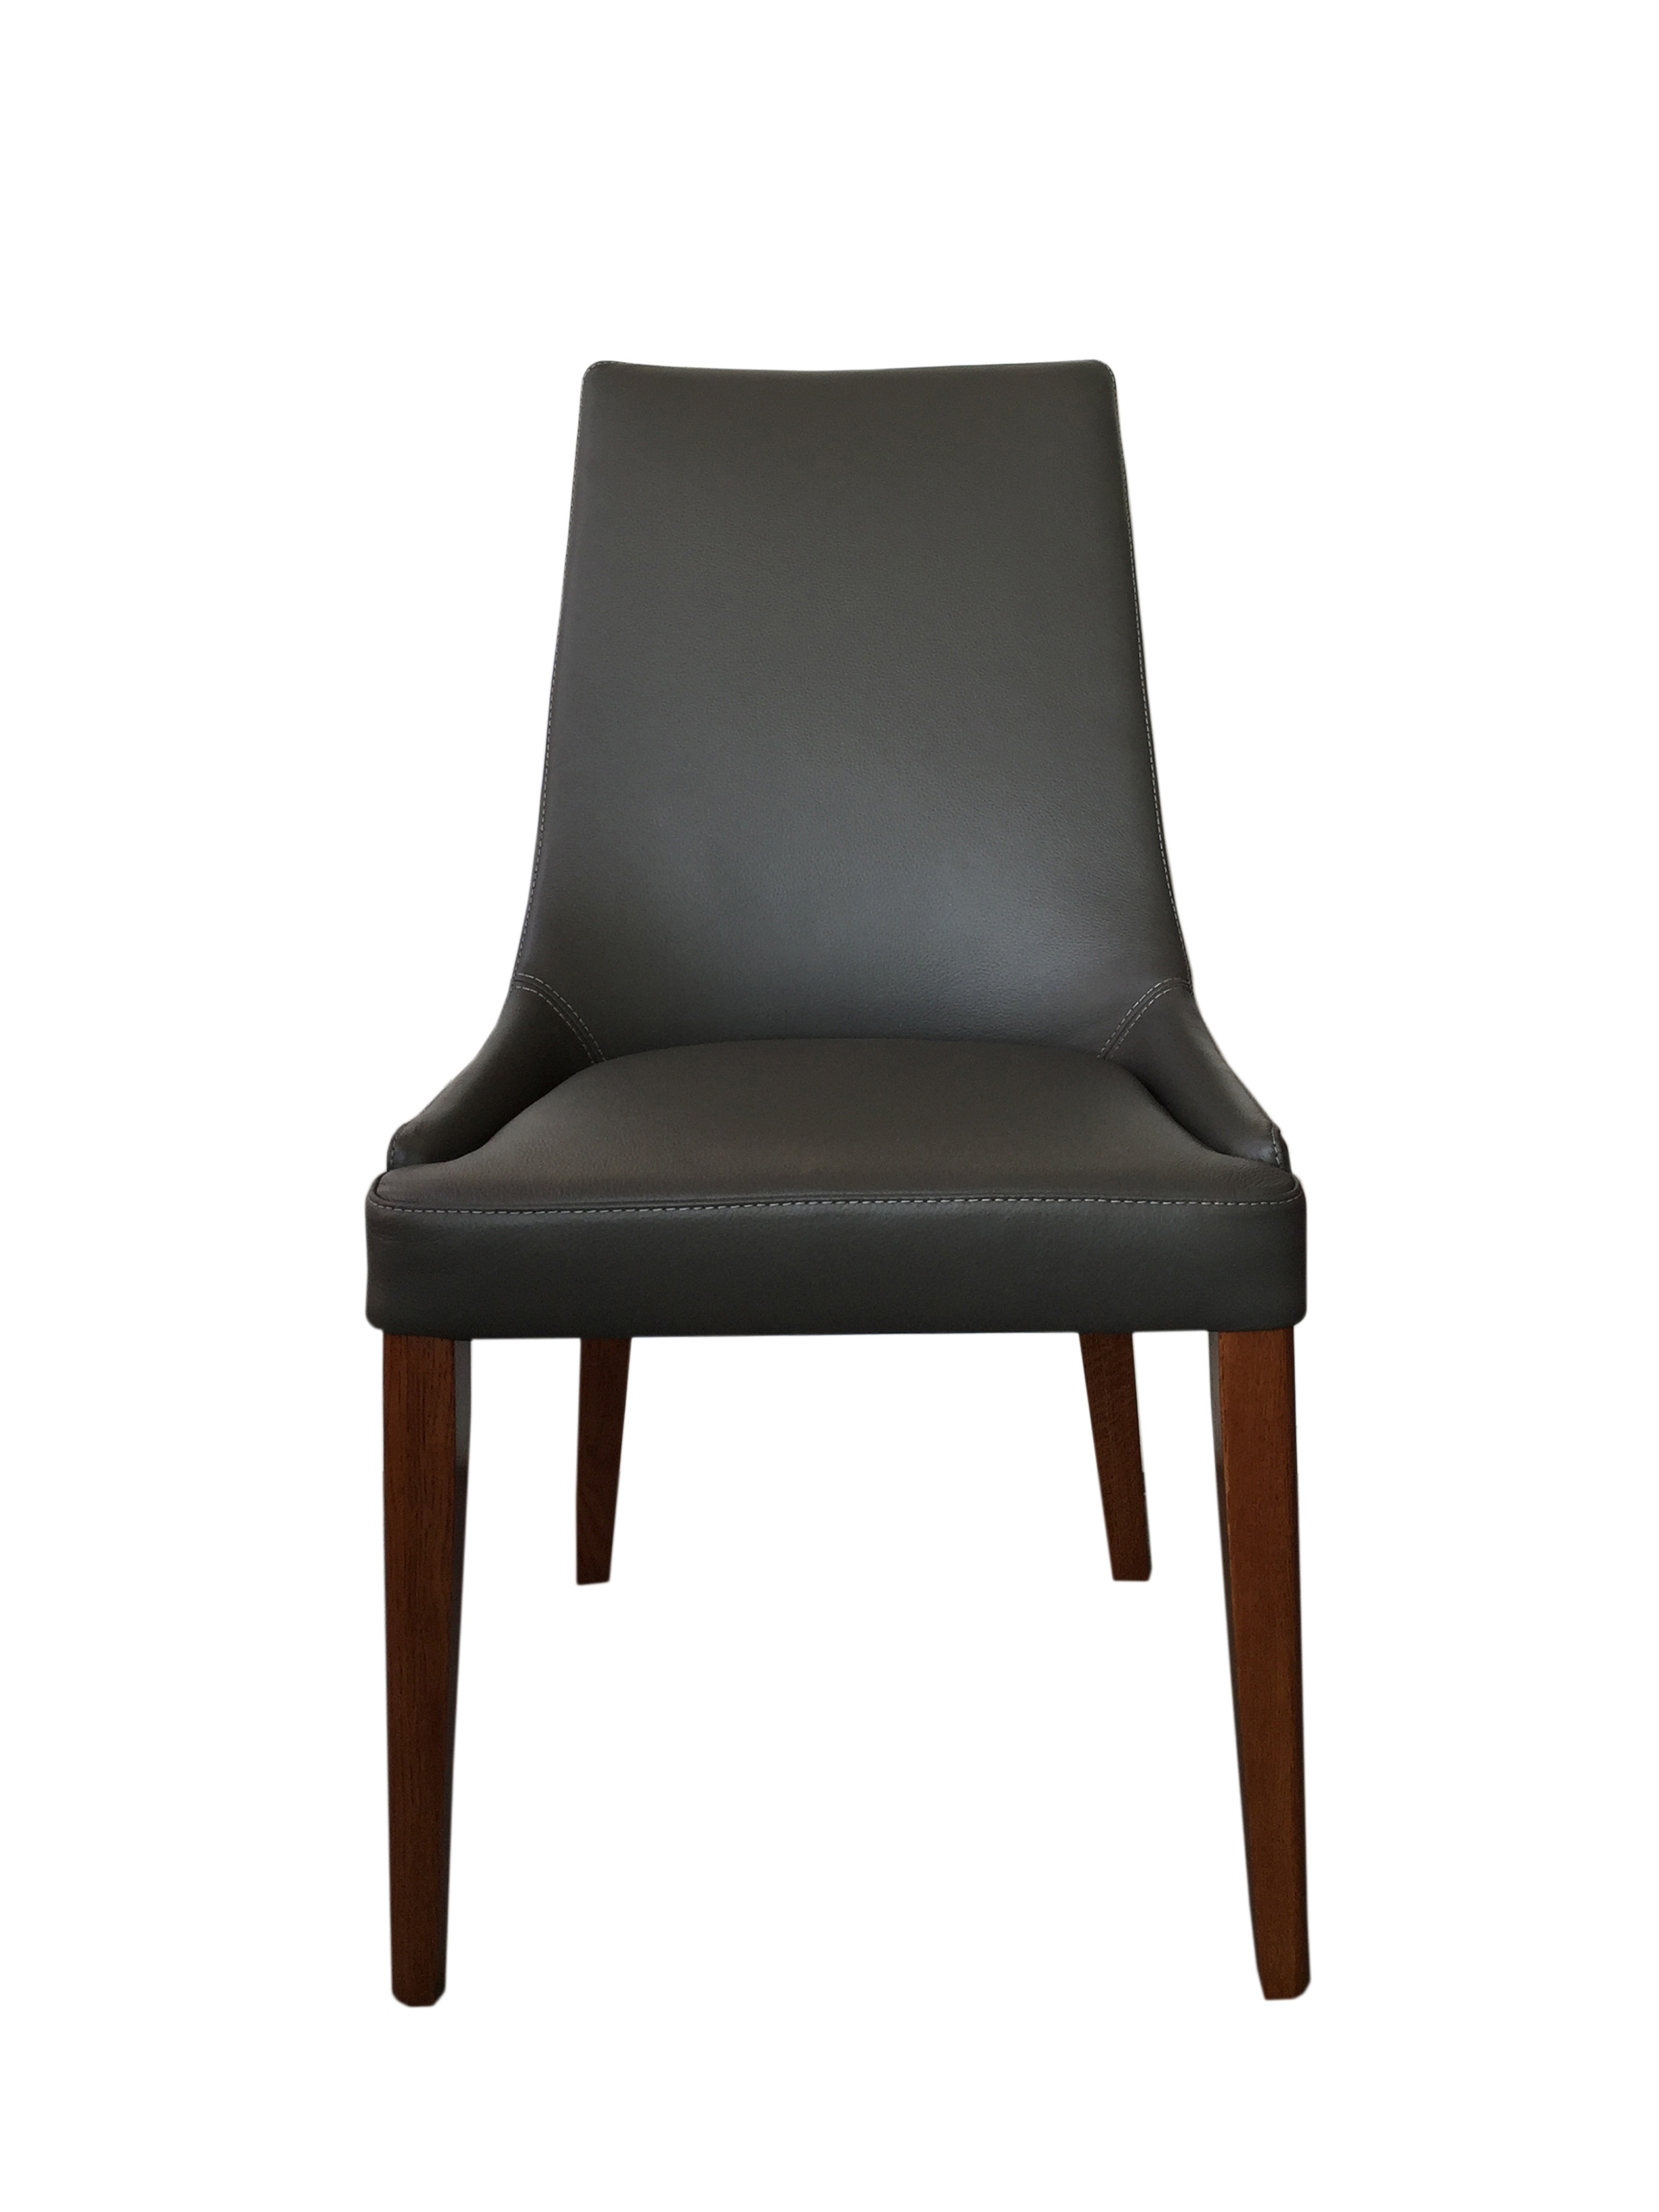 modern high back leather dining chair